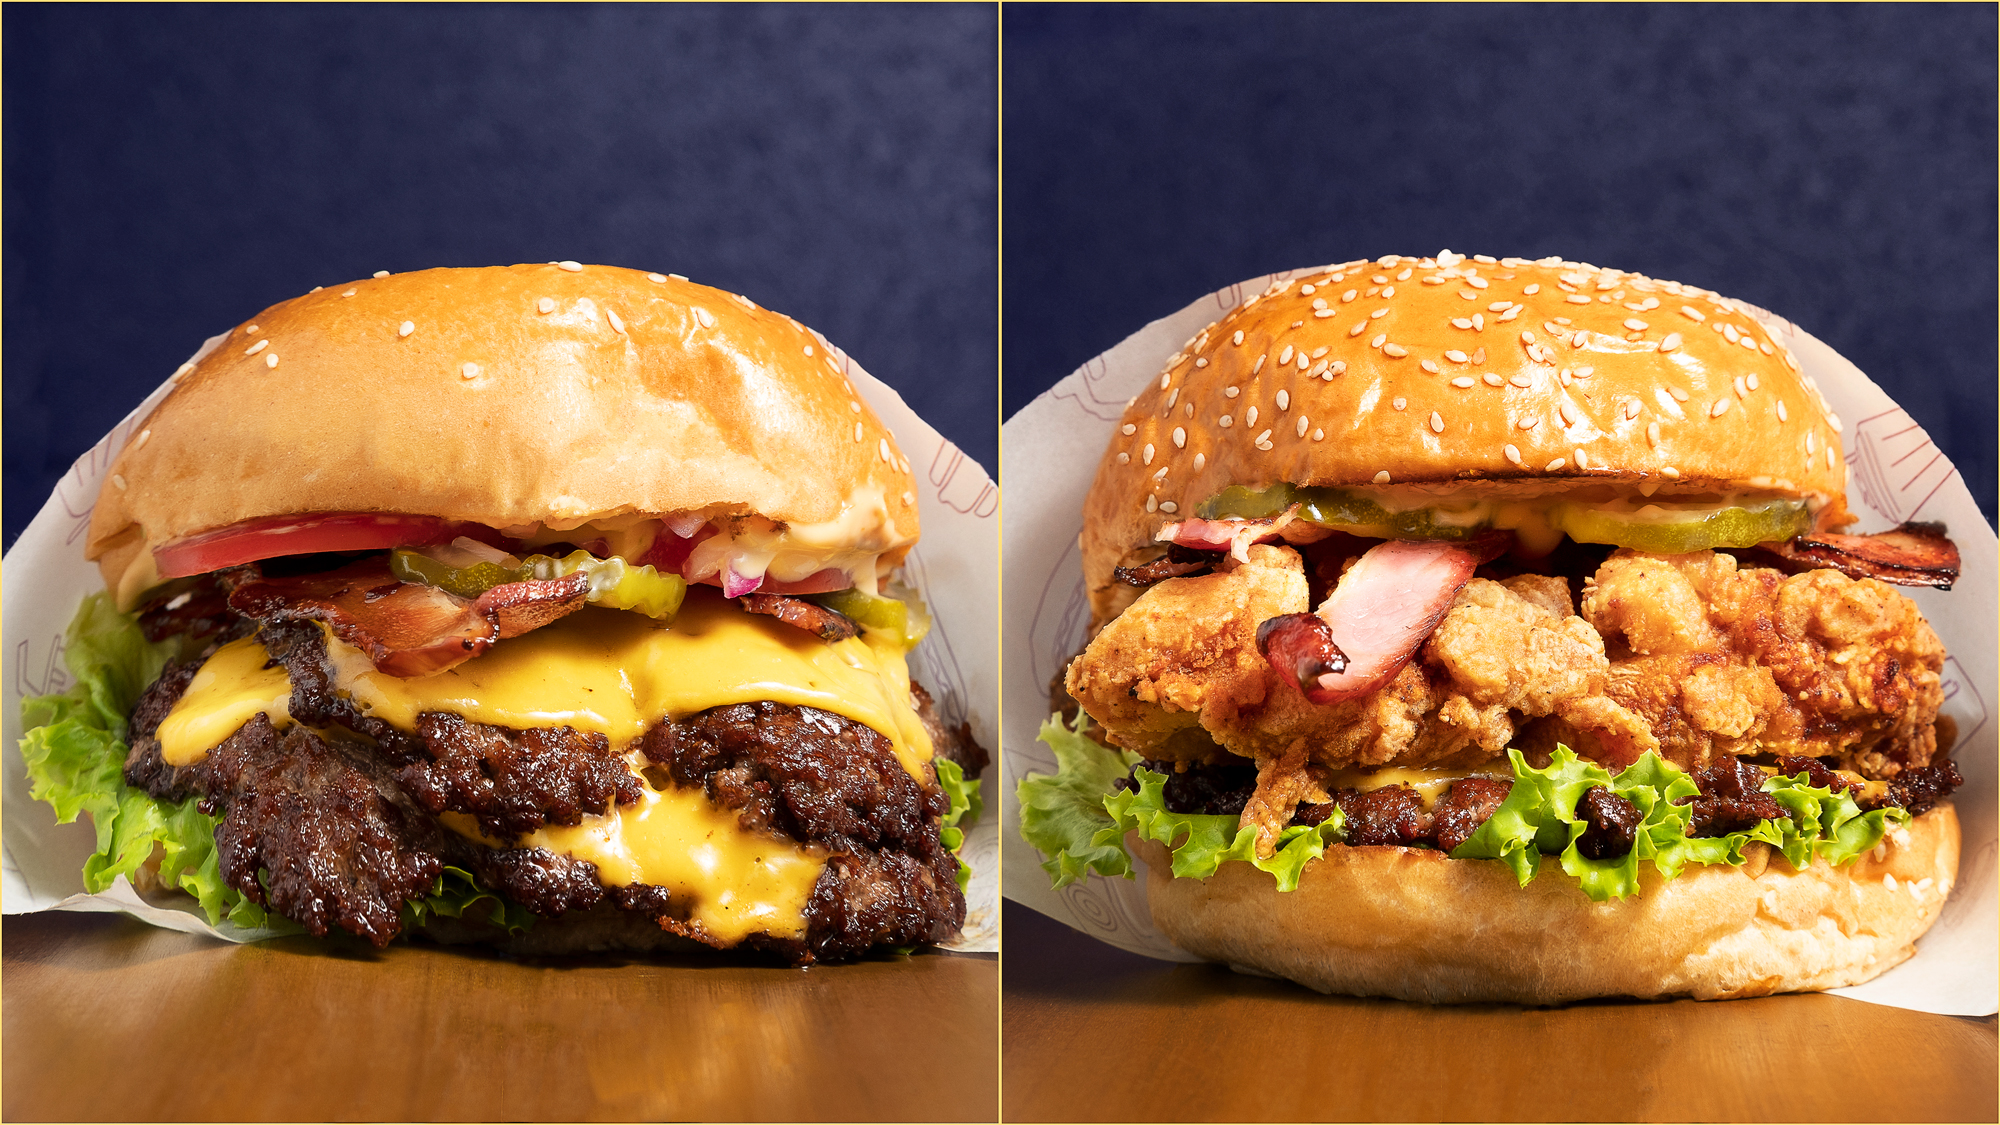 Food Photography By Wenbo Zhao Sneaky Burger